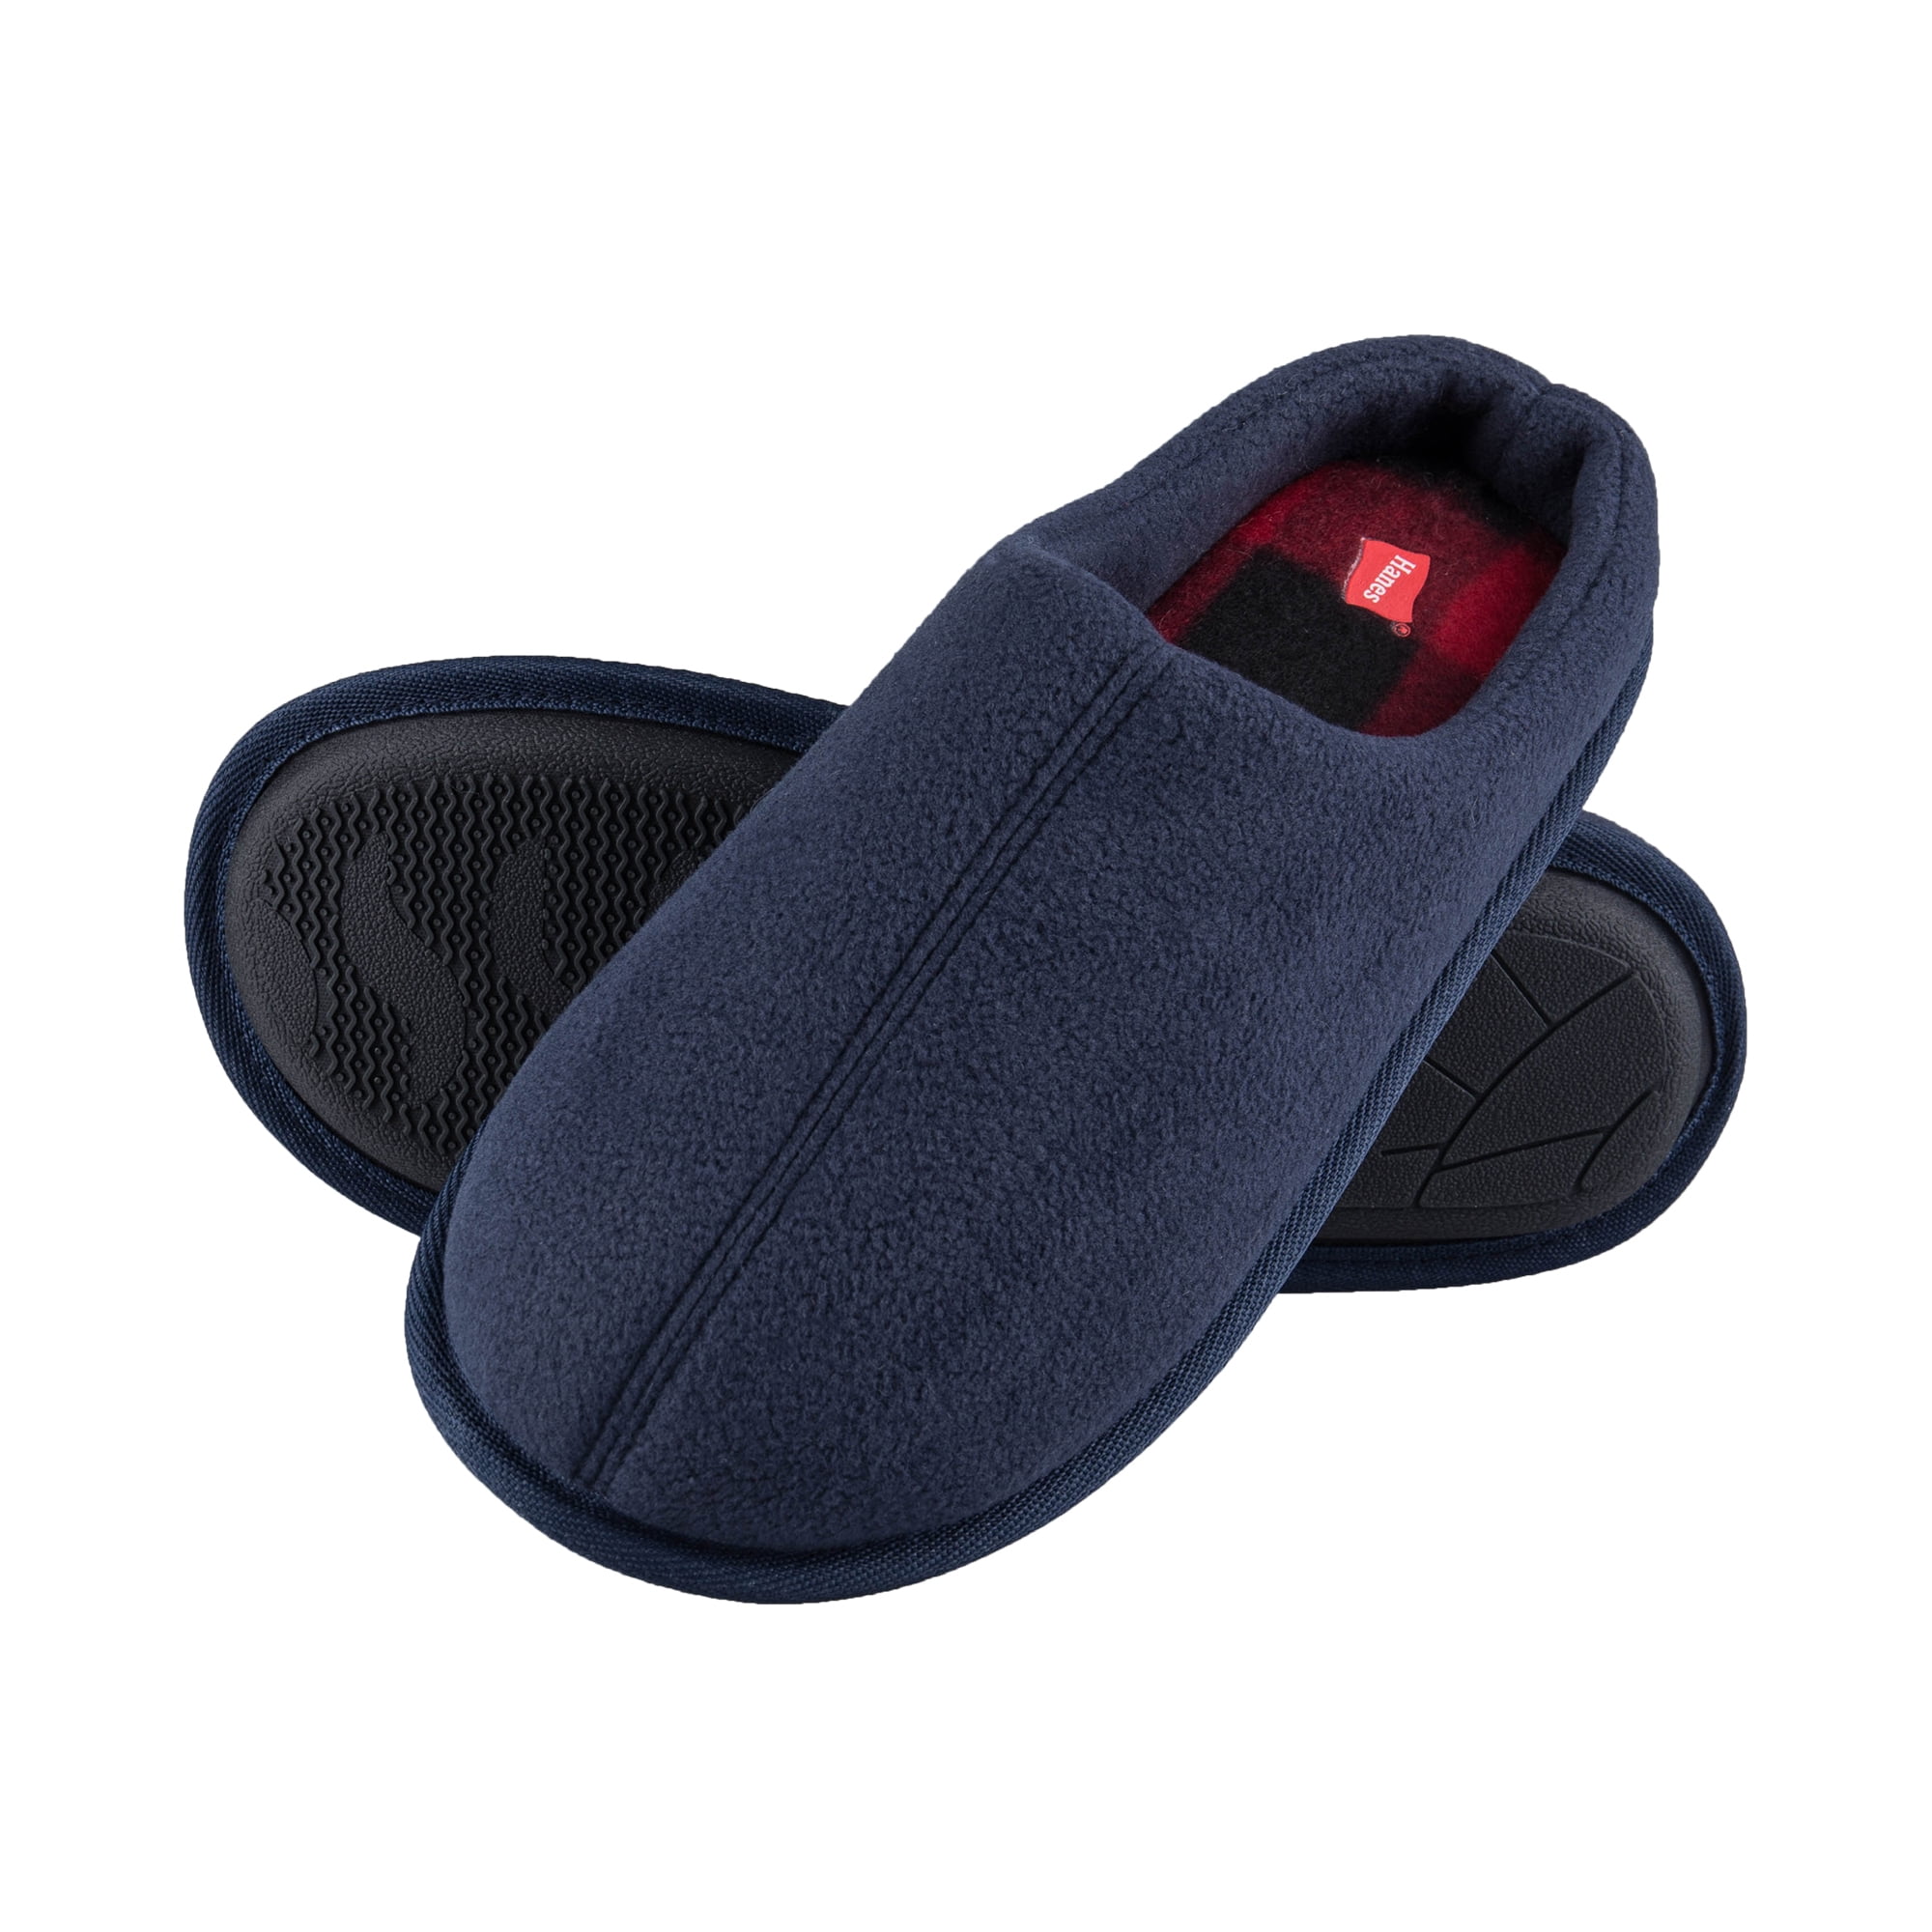 Hanes Mens Comfort Memory Foam Slip on Clog House Shoes with Indoor ...